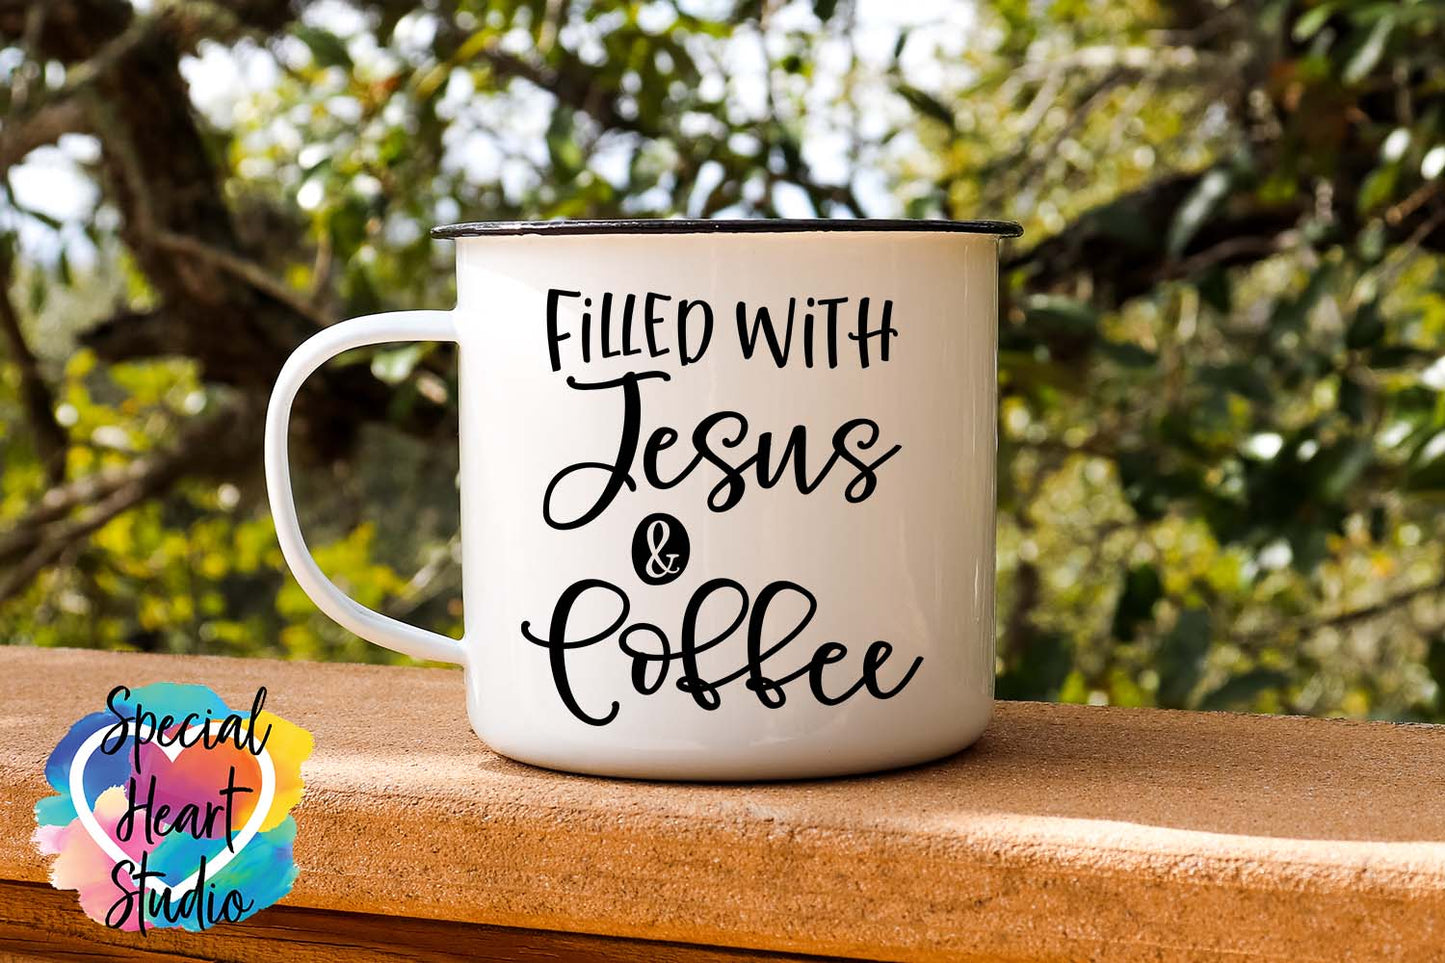 Filled with Jesus and Coffee